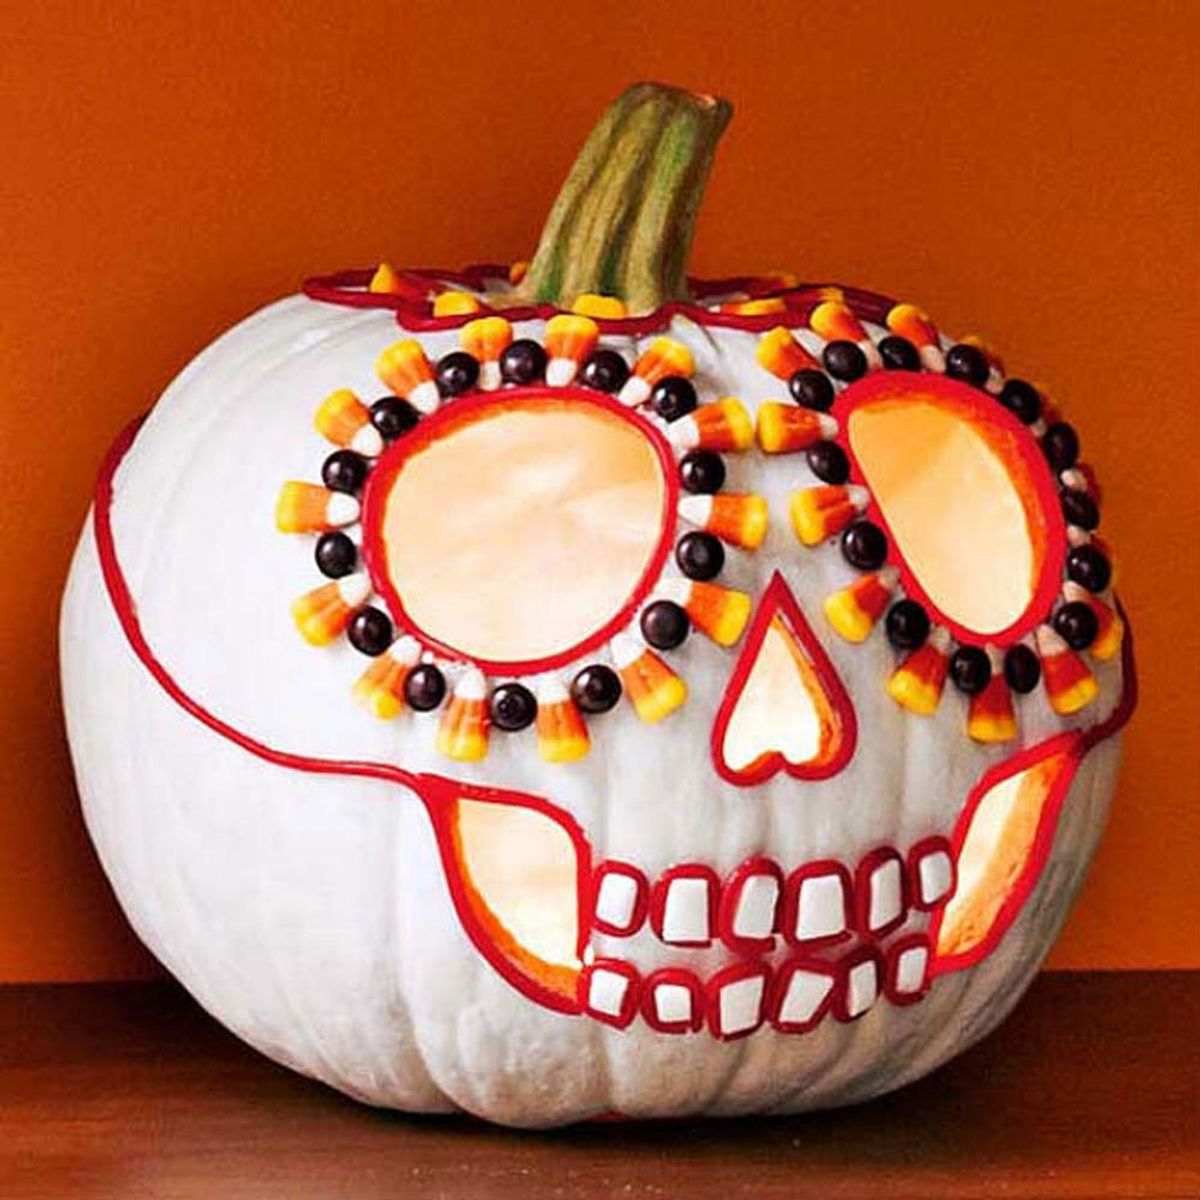 15 Sweet Ways to Decorate With Halloween Candy